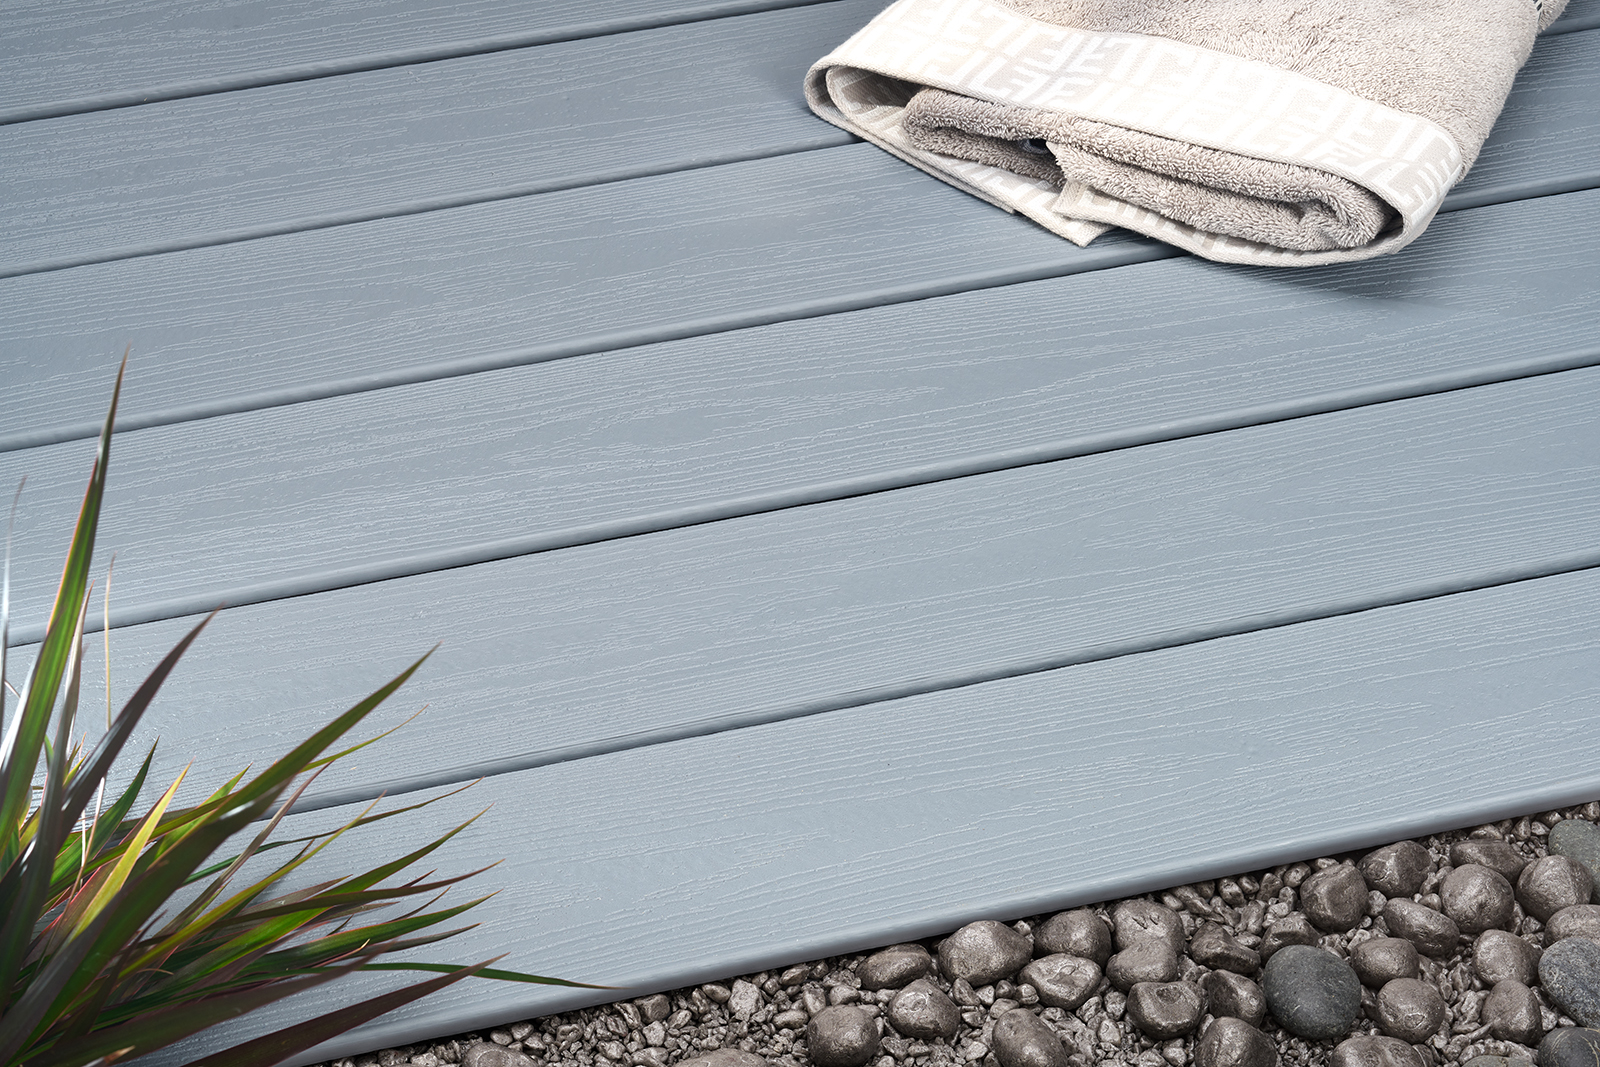 This decking board product made of biocomposite contains 75% recycled materials. Photo: UPM